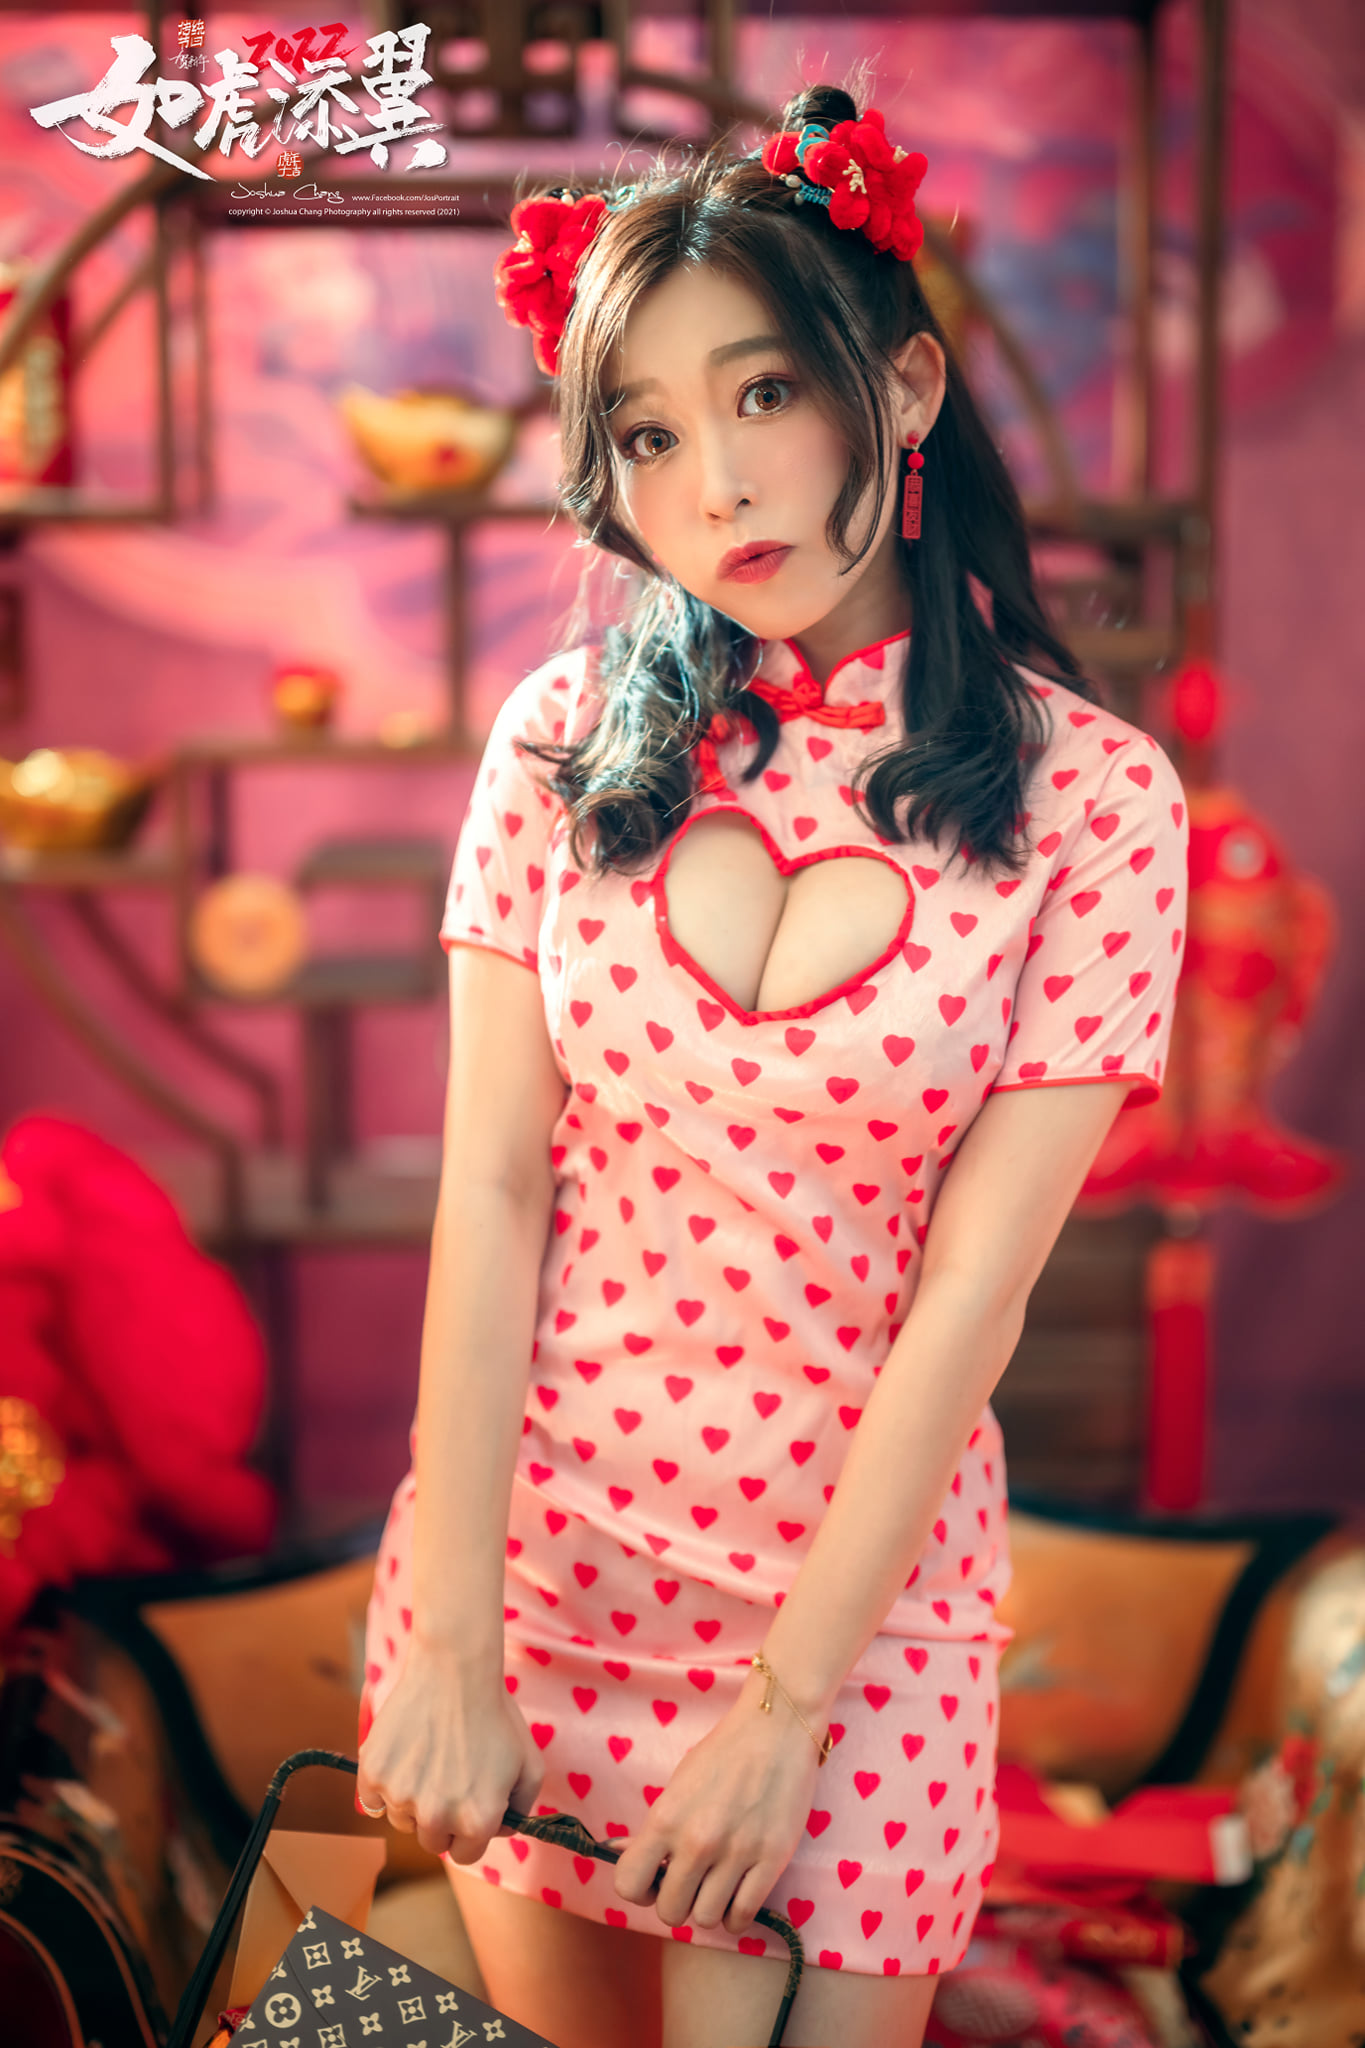 People 1365x2048 polka dots dress Asian women oriental long hair brunette red cleavage Joshua Chang looking at viewer red lipstick hazel eyes model cleavage cutout